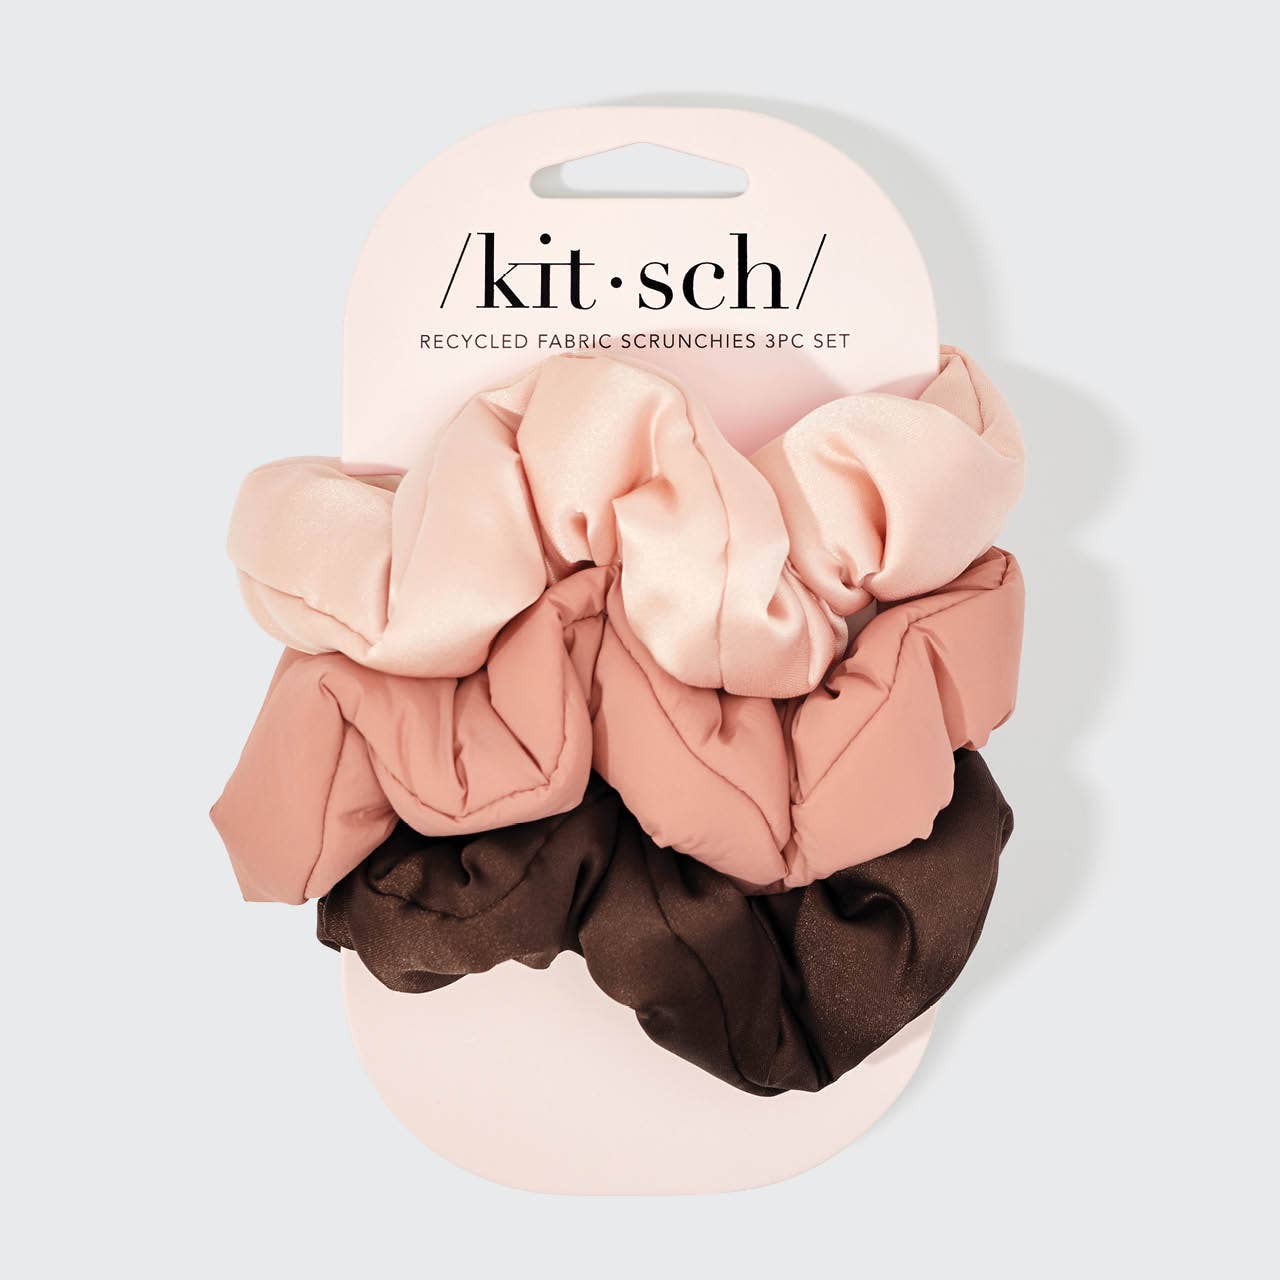 Recycled Fabric Cloud Scrunchies 3pc Set  | Kitsch